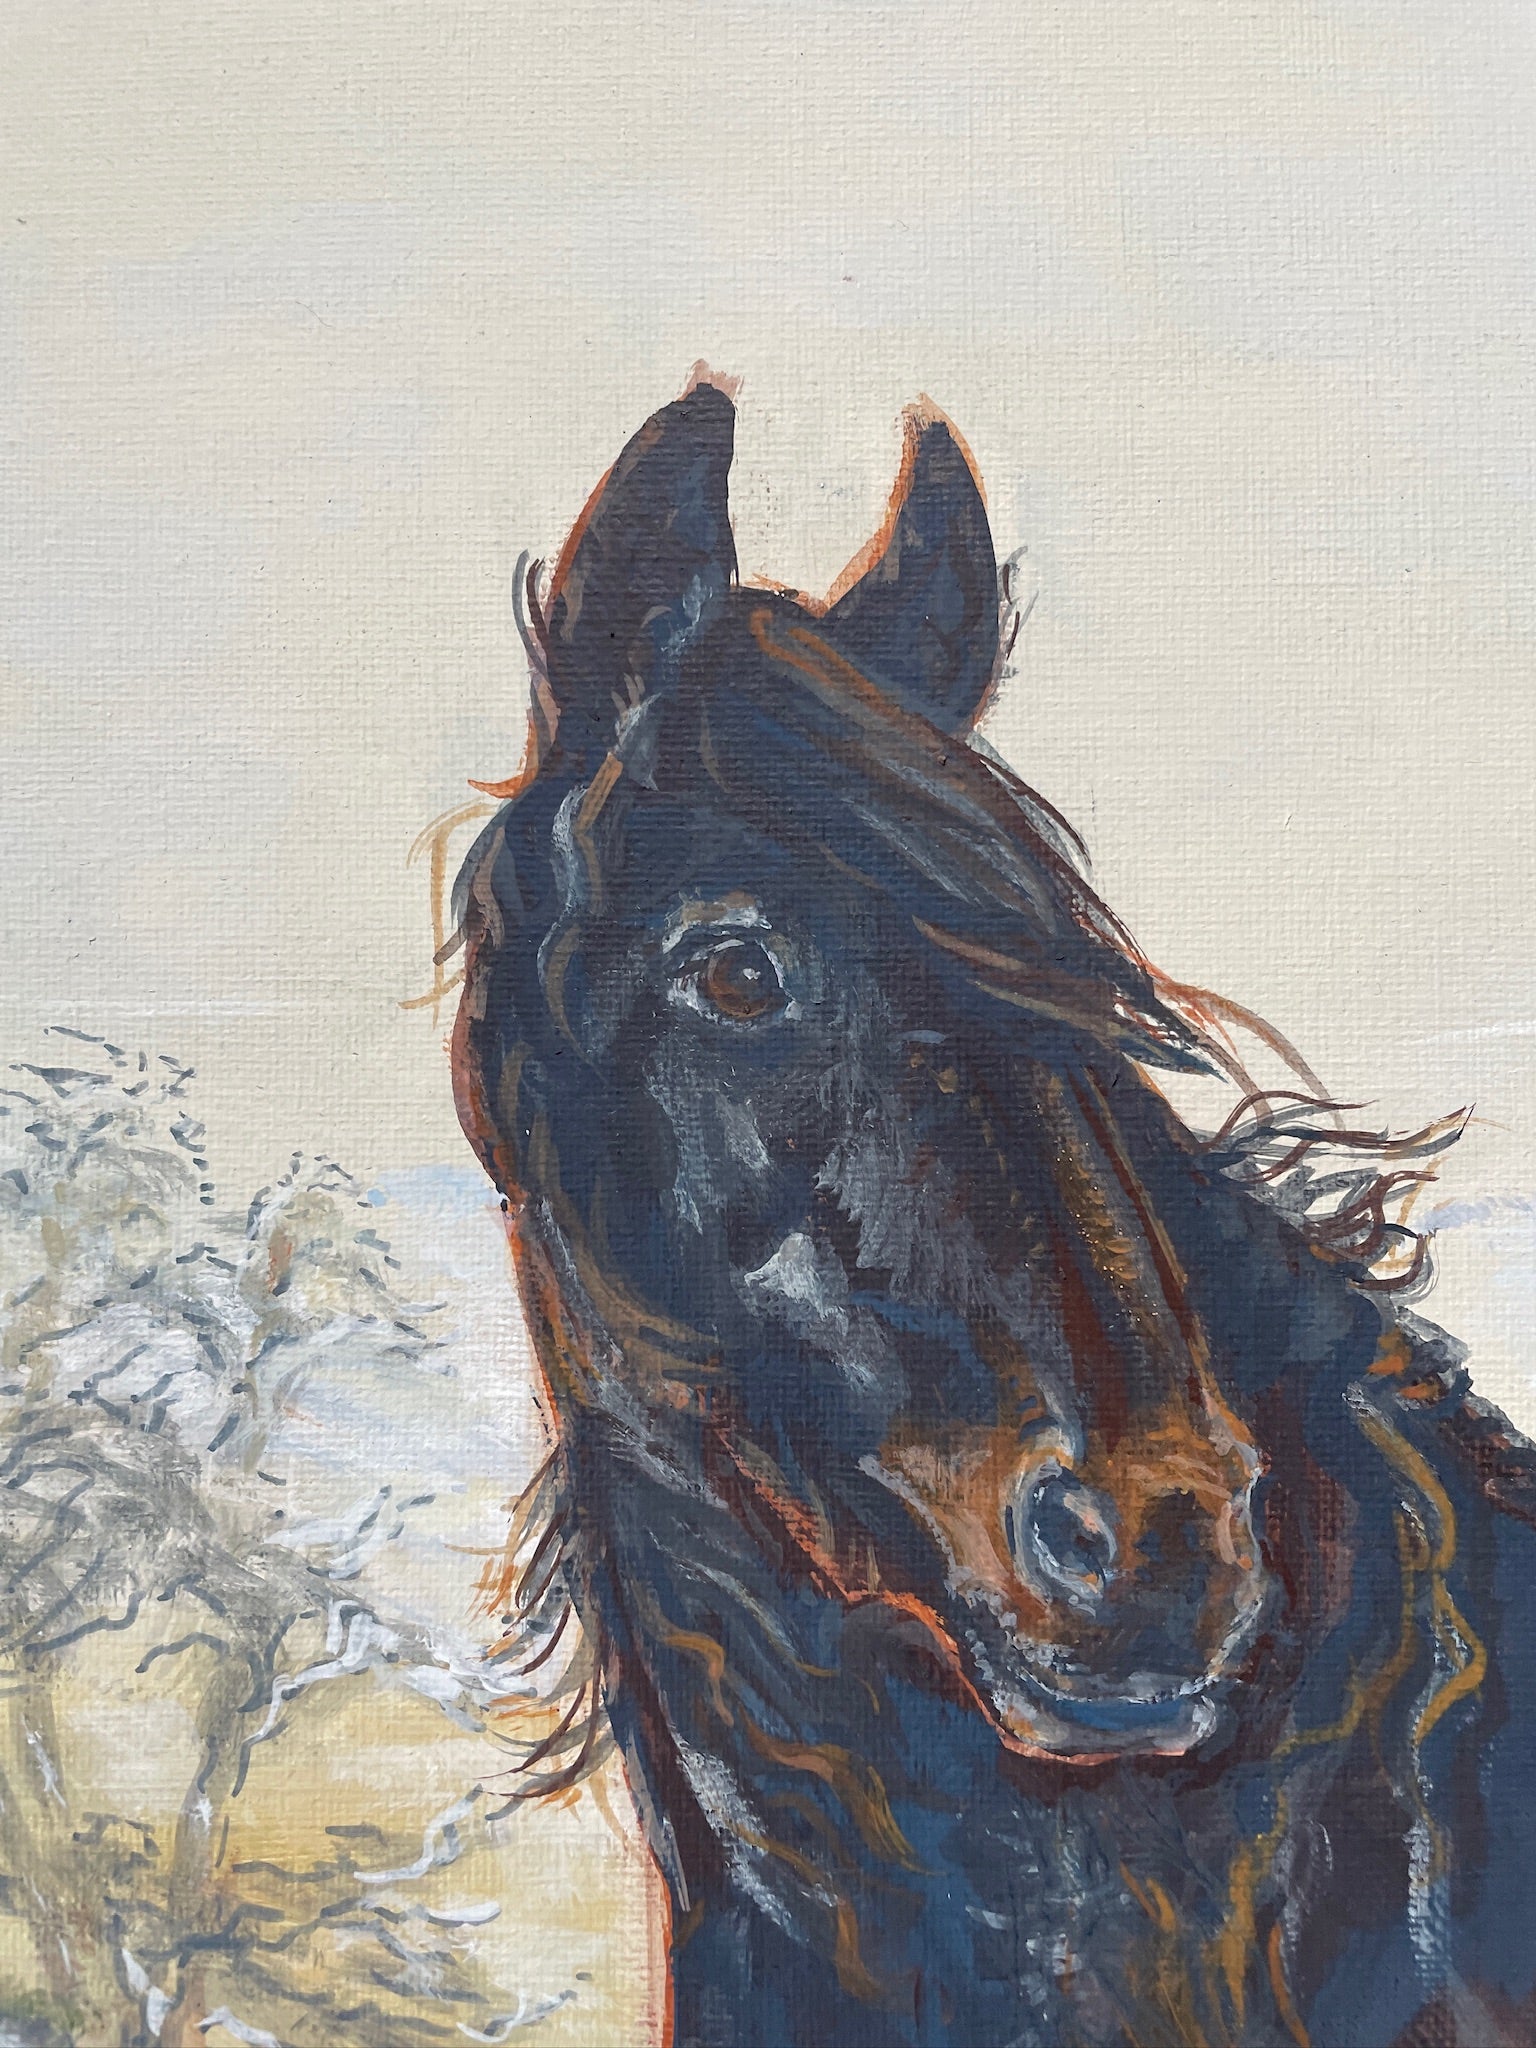 The focus of this painting is a majestic Dales pony in the rugged countryside terrain of the Yorkshire Dales. 